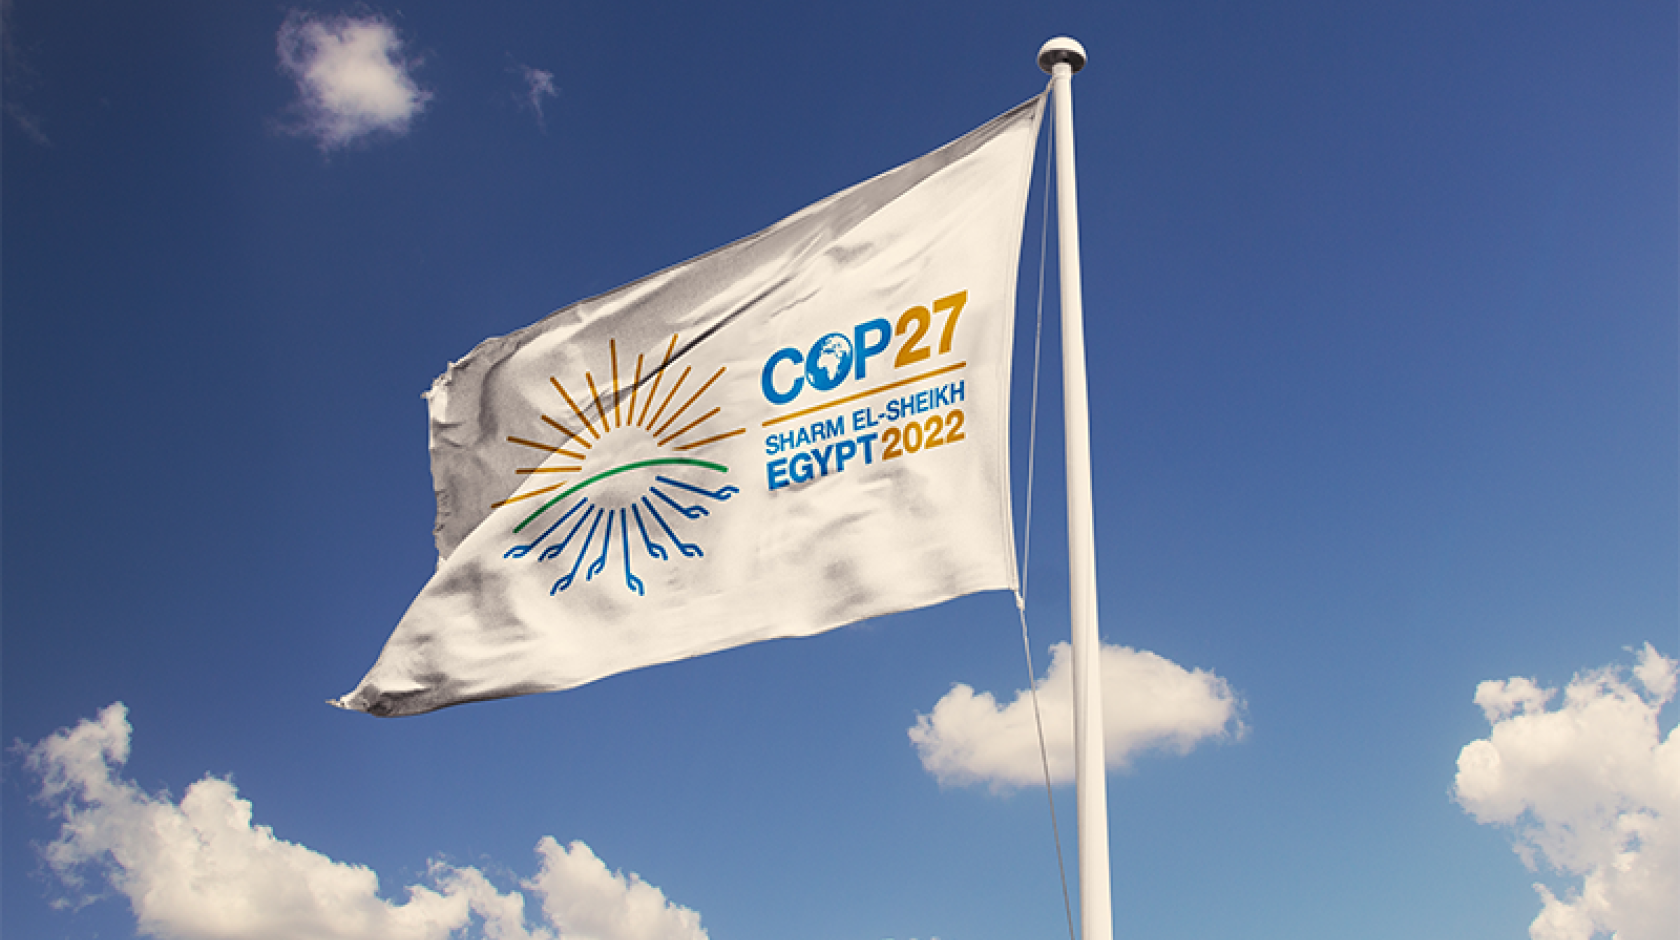 COP27 climate summit flag